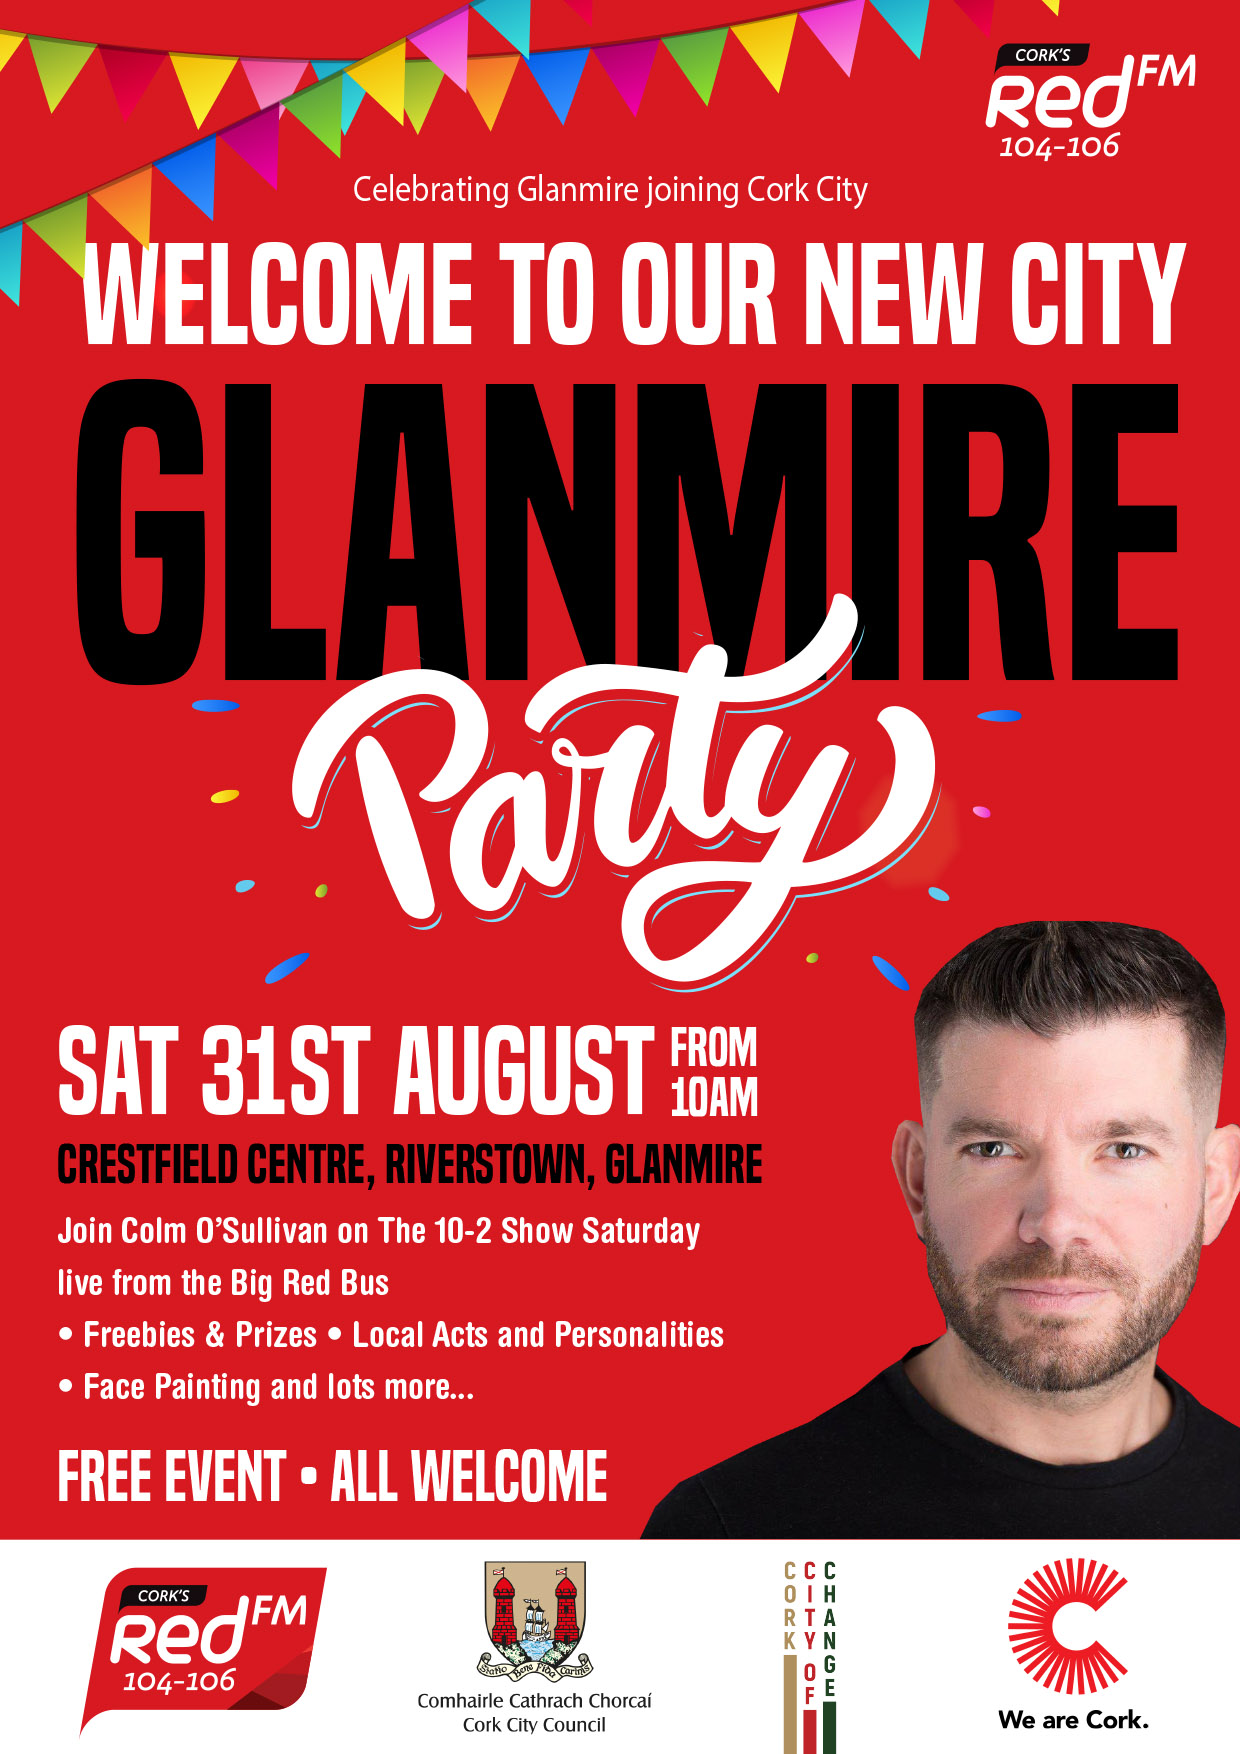 Welcome to our new city family fun days kick off in Glanmire 